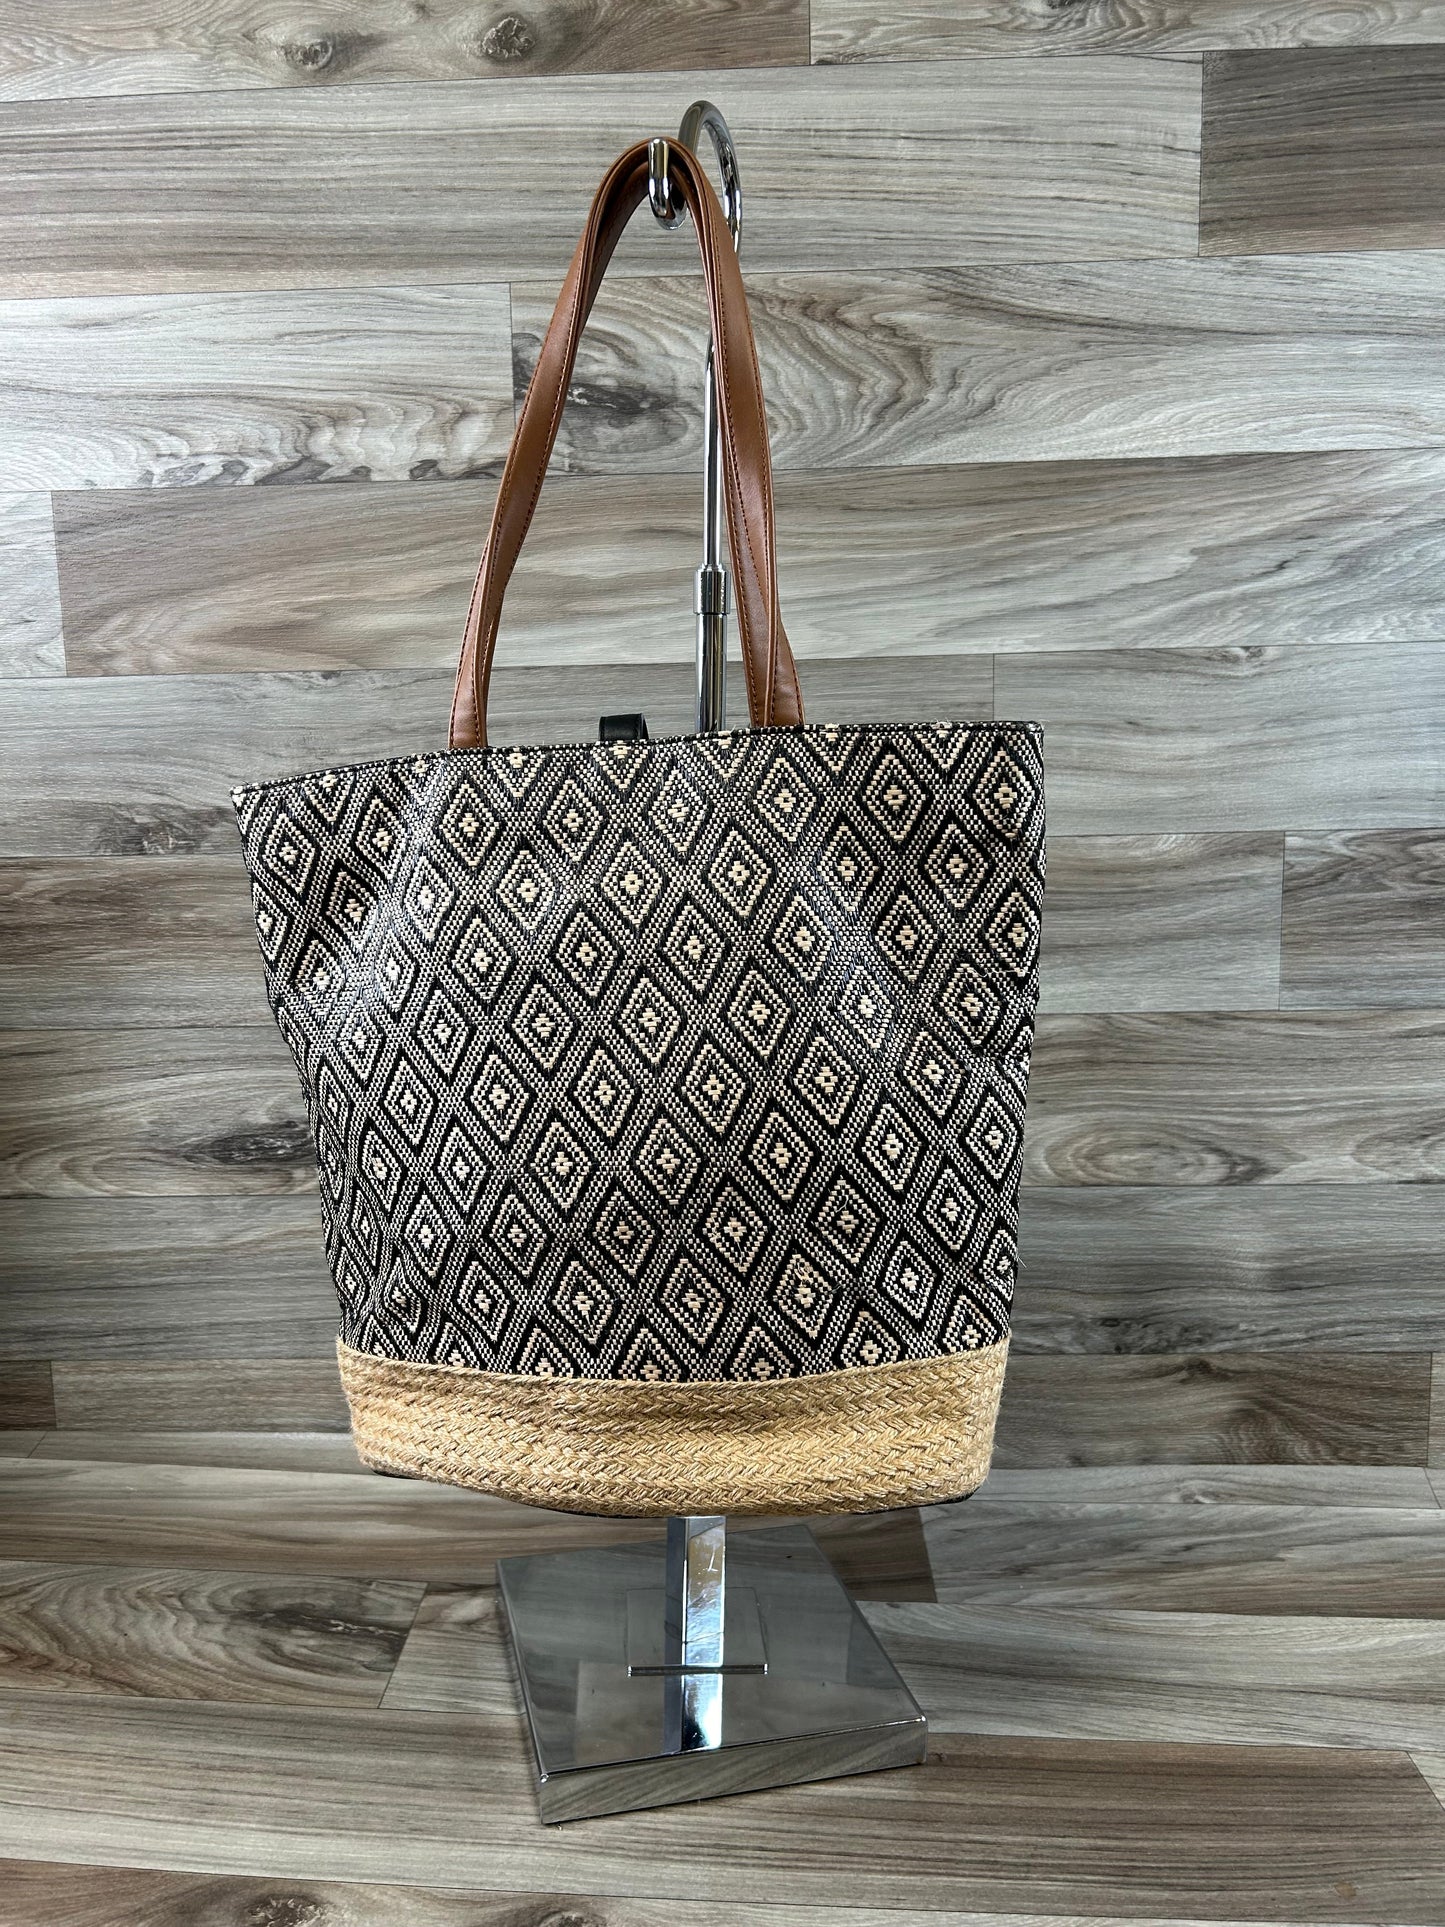 Tote Kelly And Katie, Size Medium